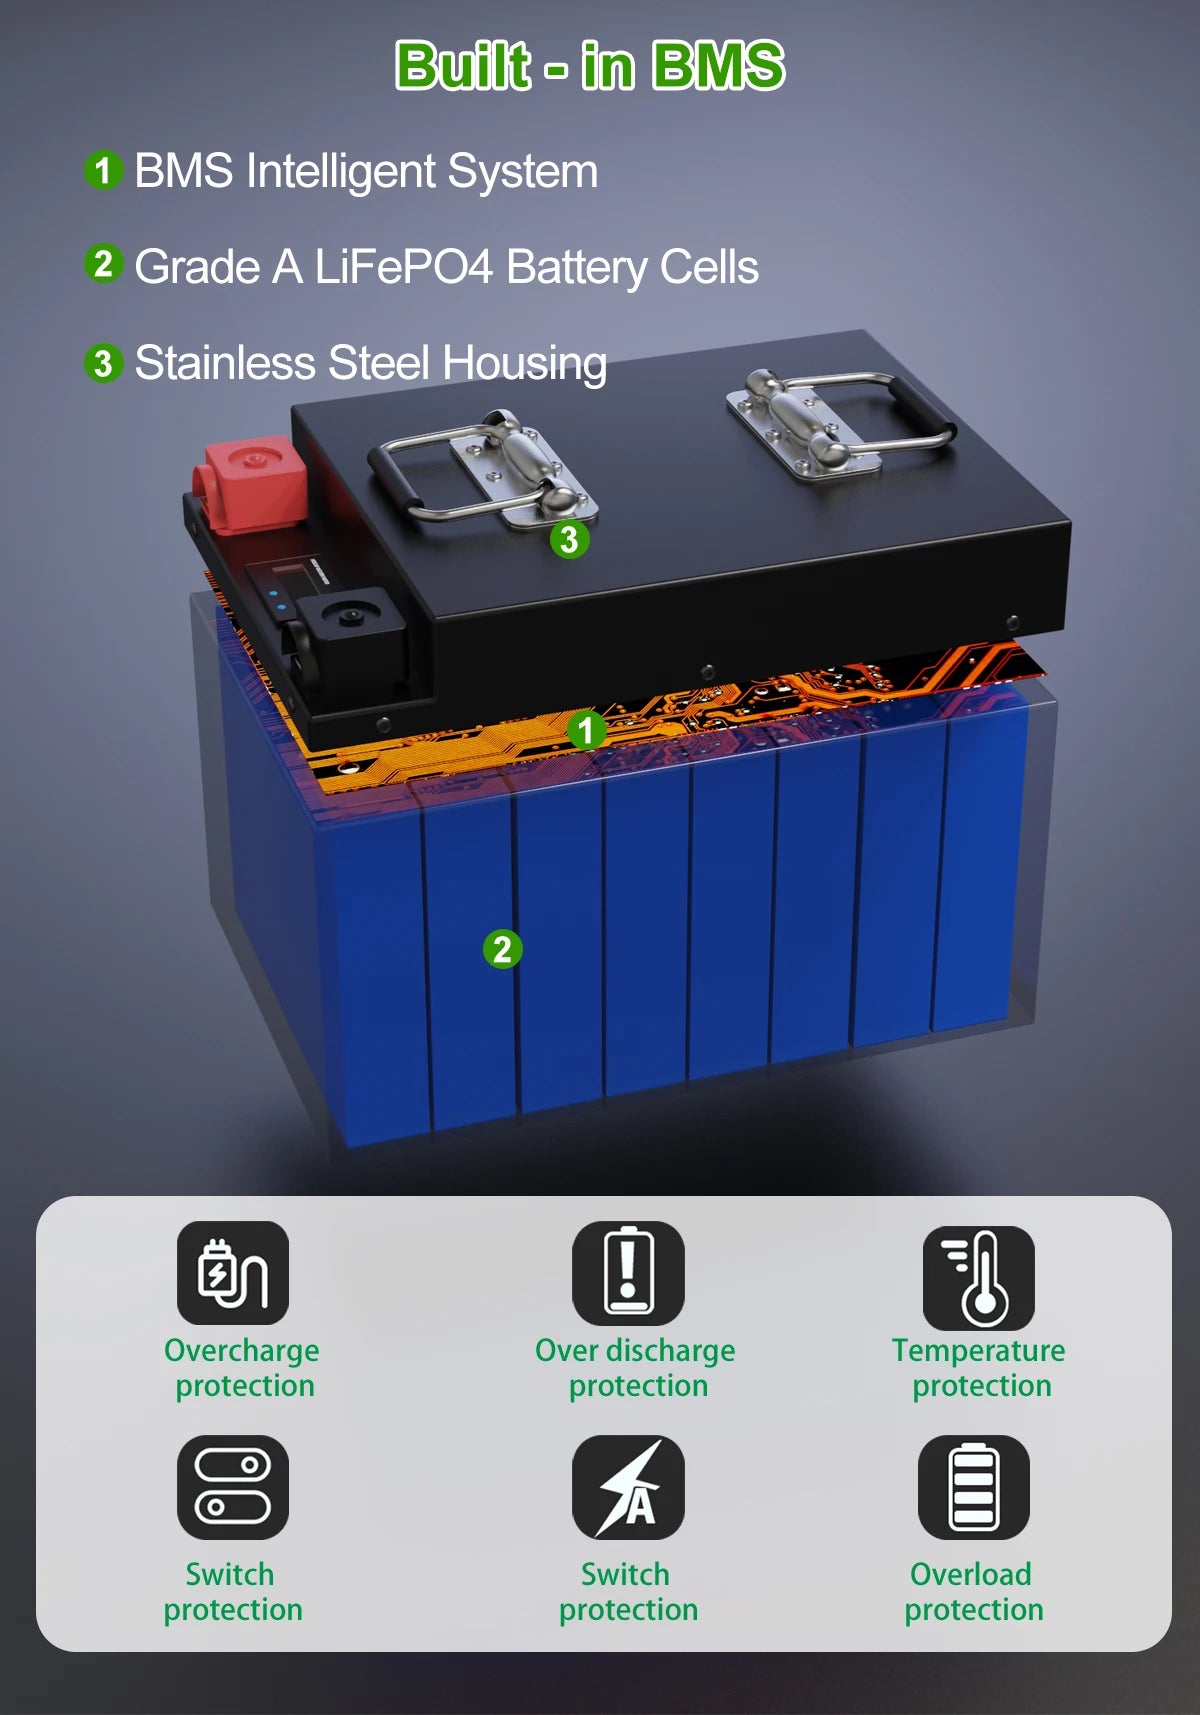 12V 360Ah 280AH LiFePO4 Battery, Intelligent 12V 360Ah lithium-ion battery pack with advanced safety features.